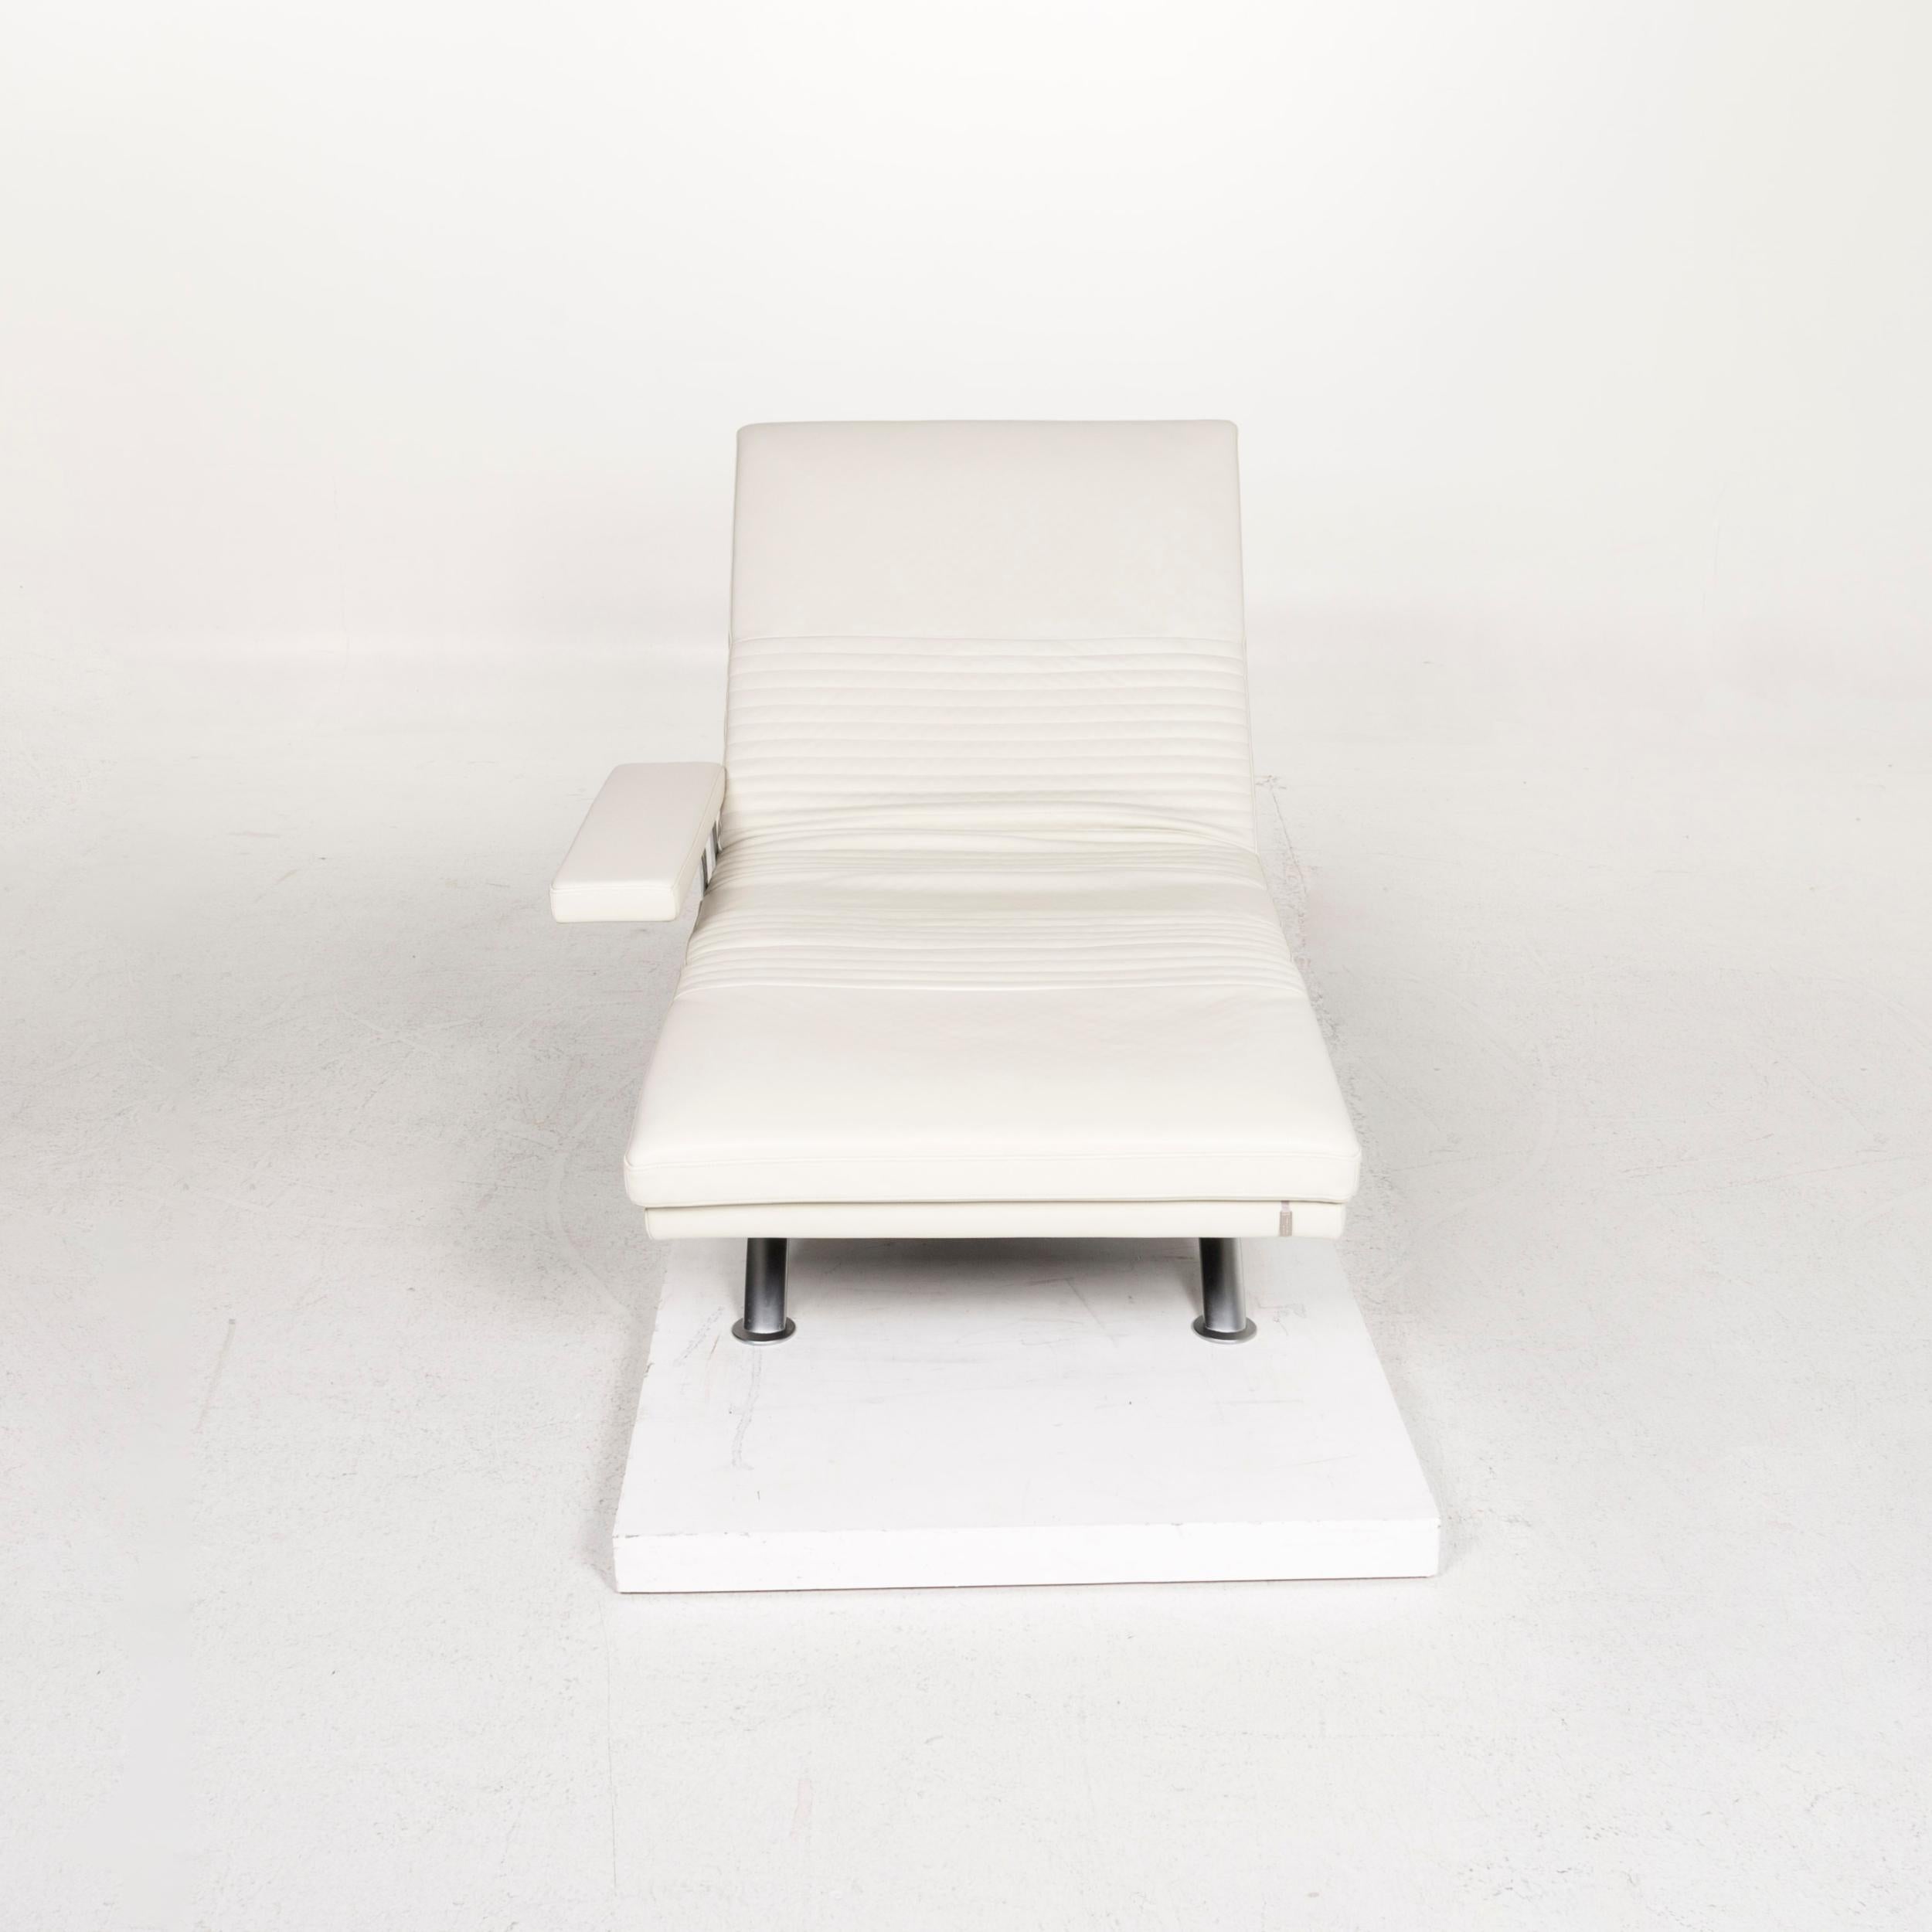 Three-Point Leather Lounger Cream Function Relax Function Sleep Function 2 For Sale 2